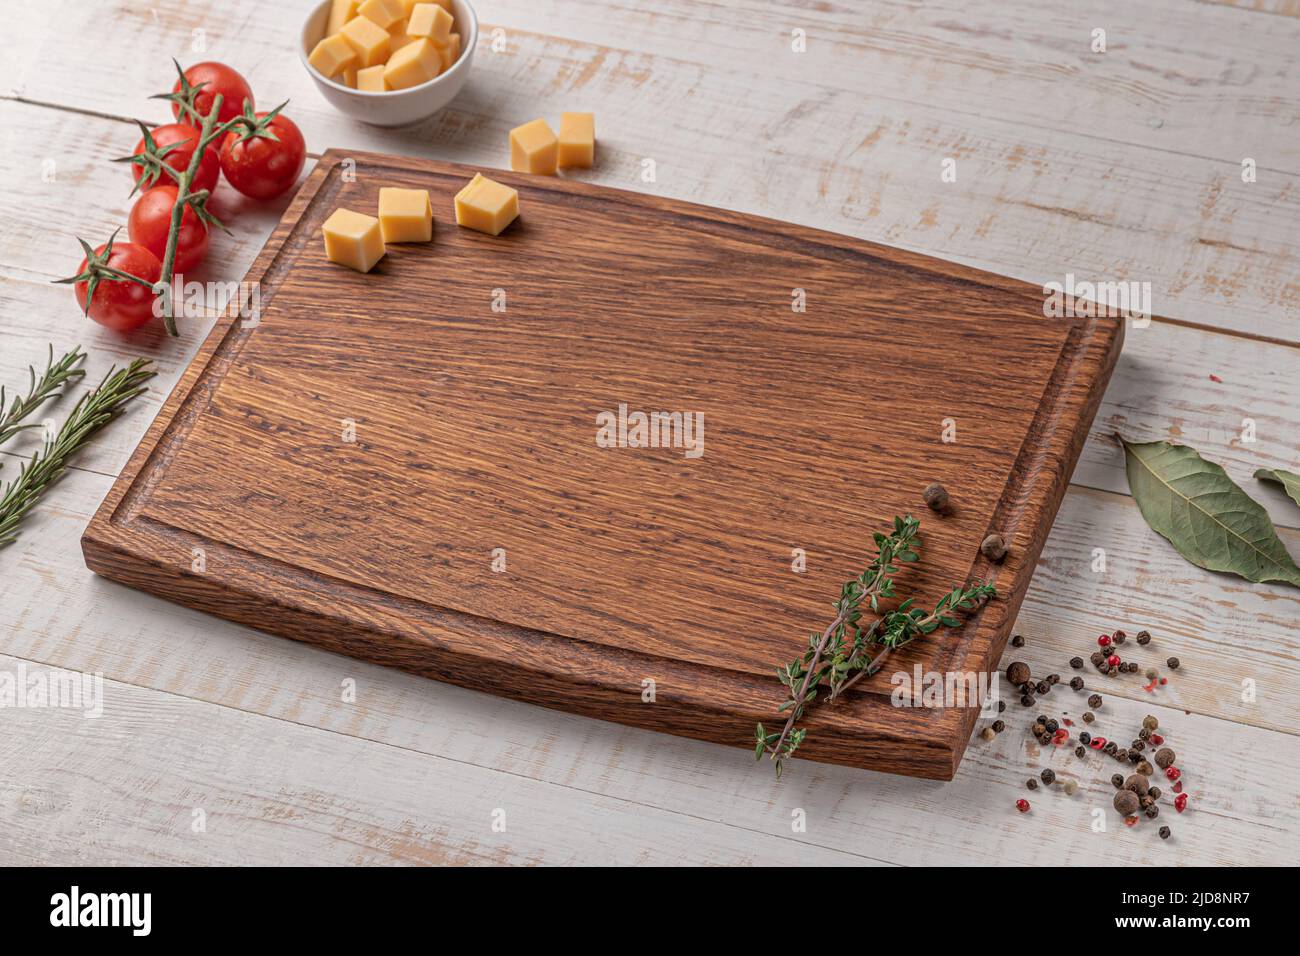 square wooden cutting board with edging. cherry tomatoes, slices of cheese and spices on a white background. mockup with copy space for text, side vie Stock Photo